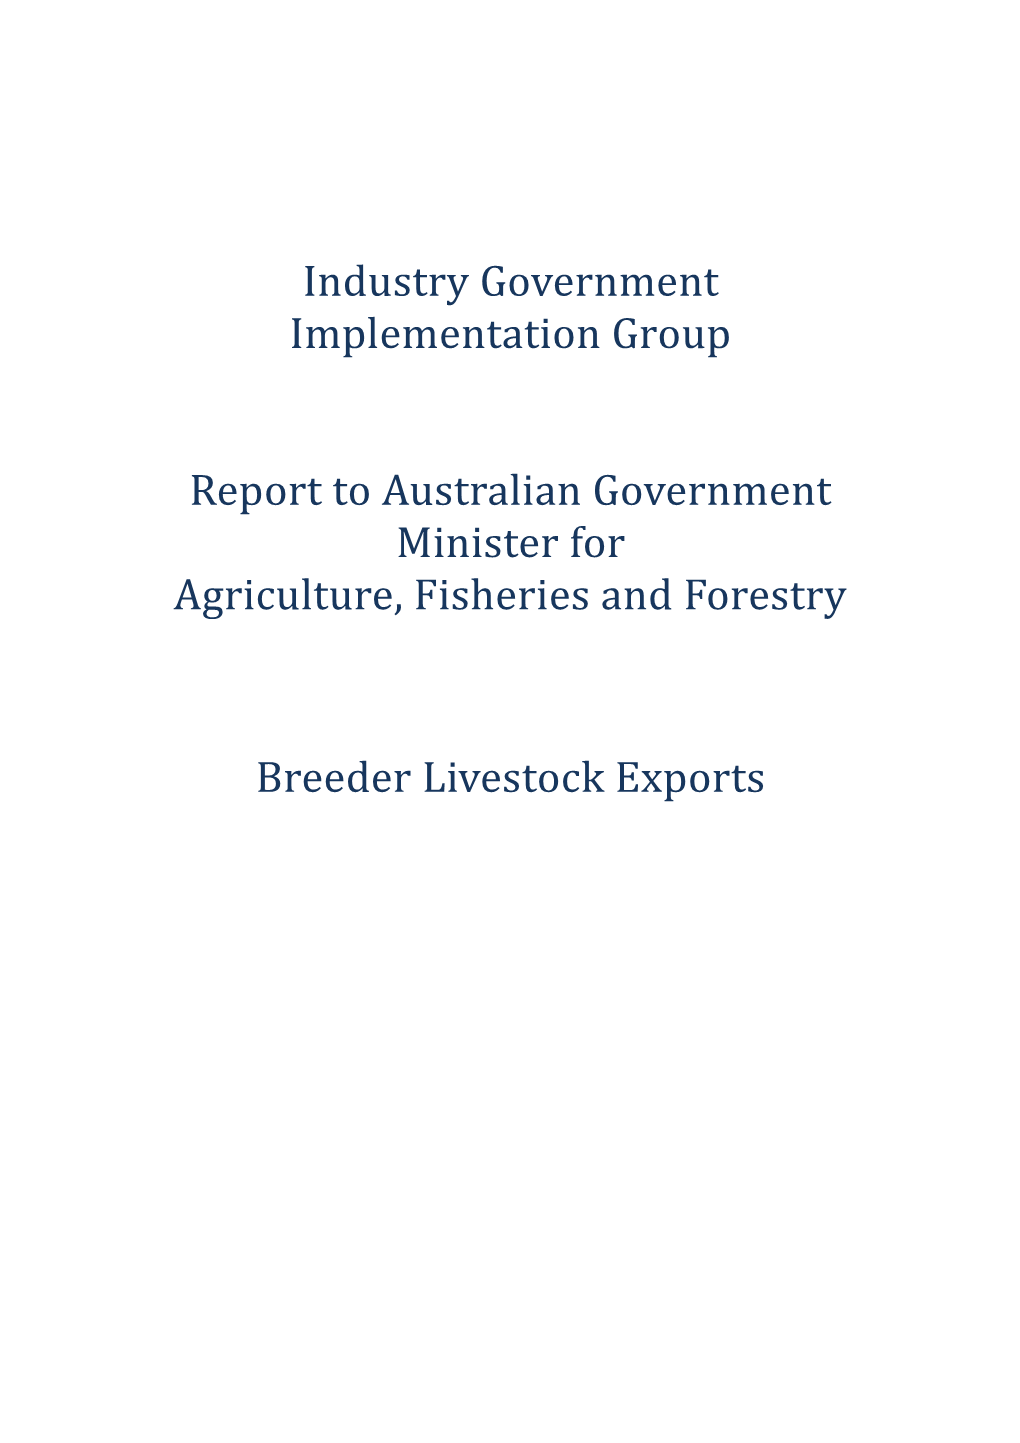 Industry Government Implementation Group Report to Australian Government Minister For